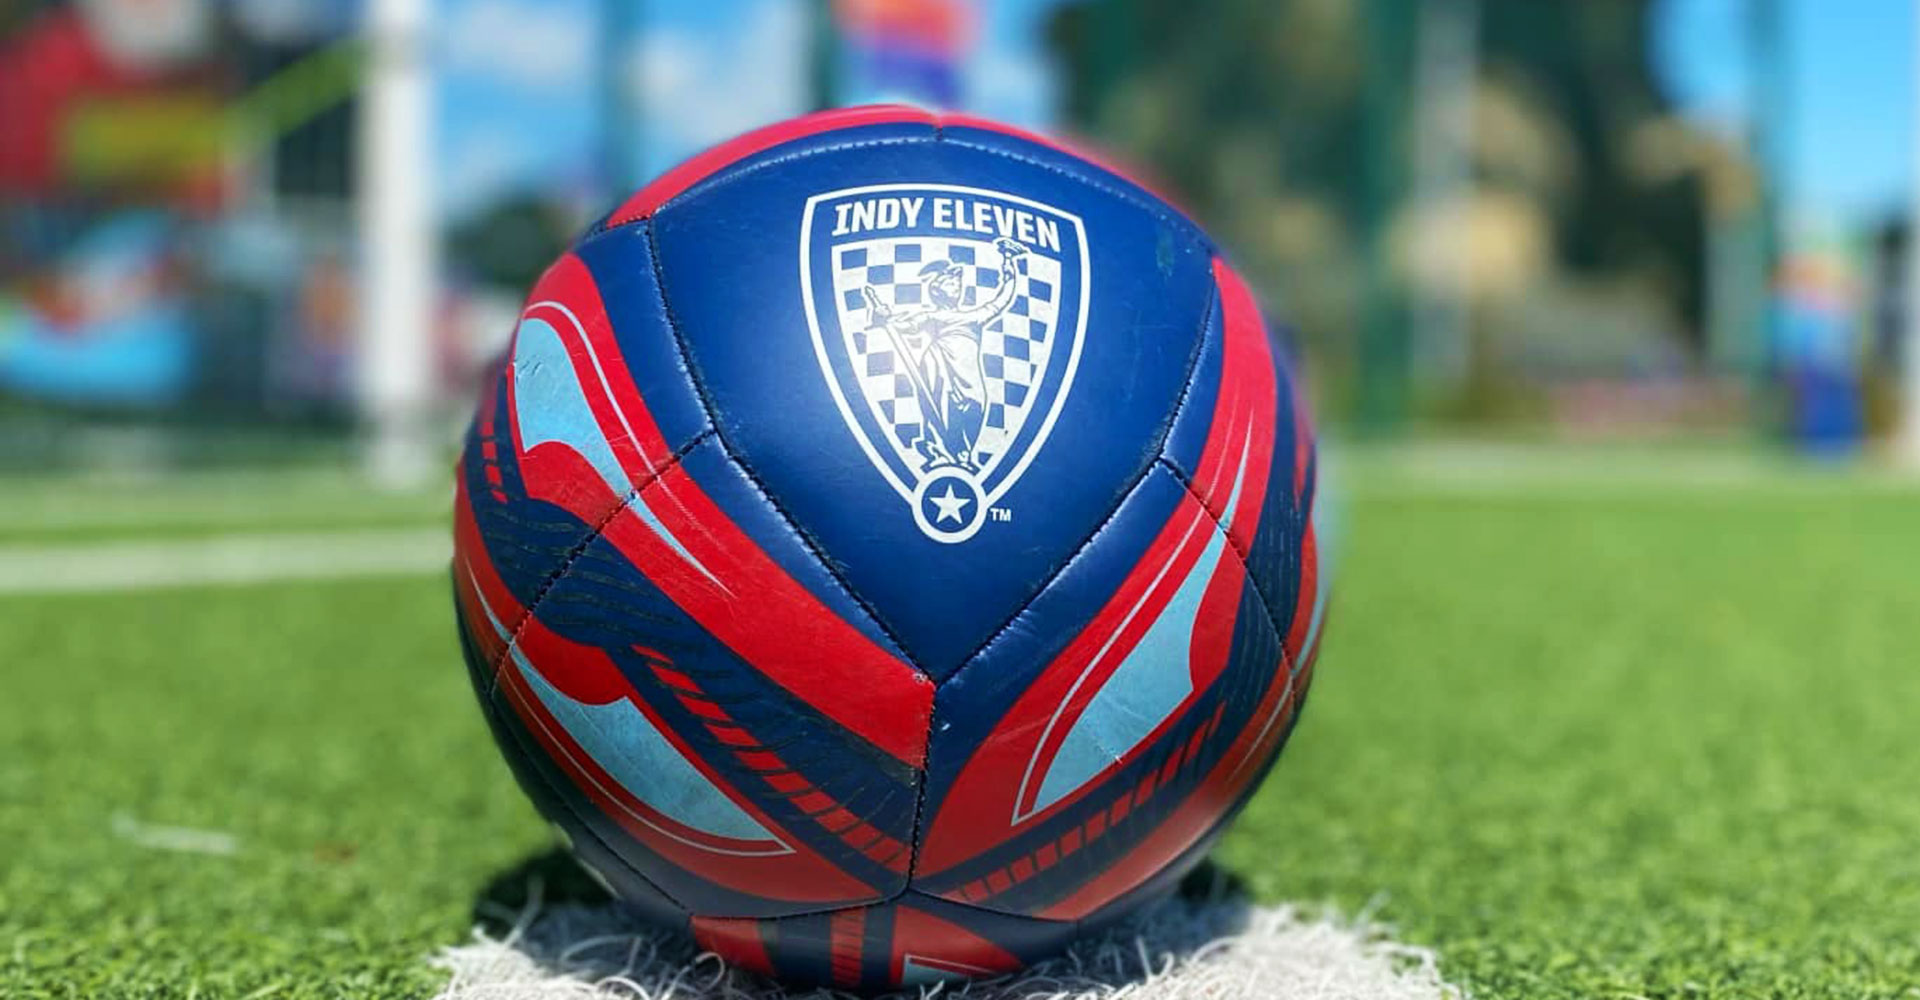 Red, blue, white Indy Eleven soccer ball sitting on a green soccer pitch.